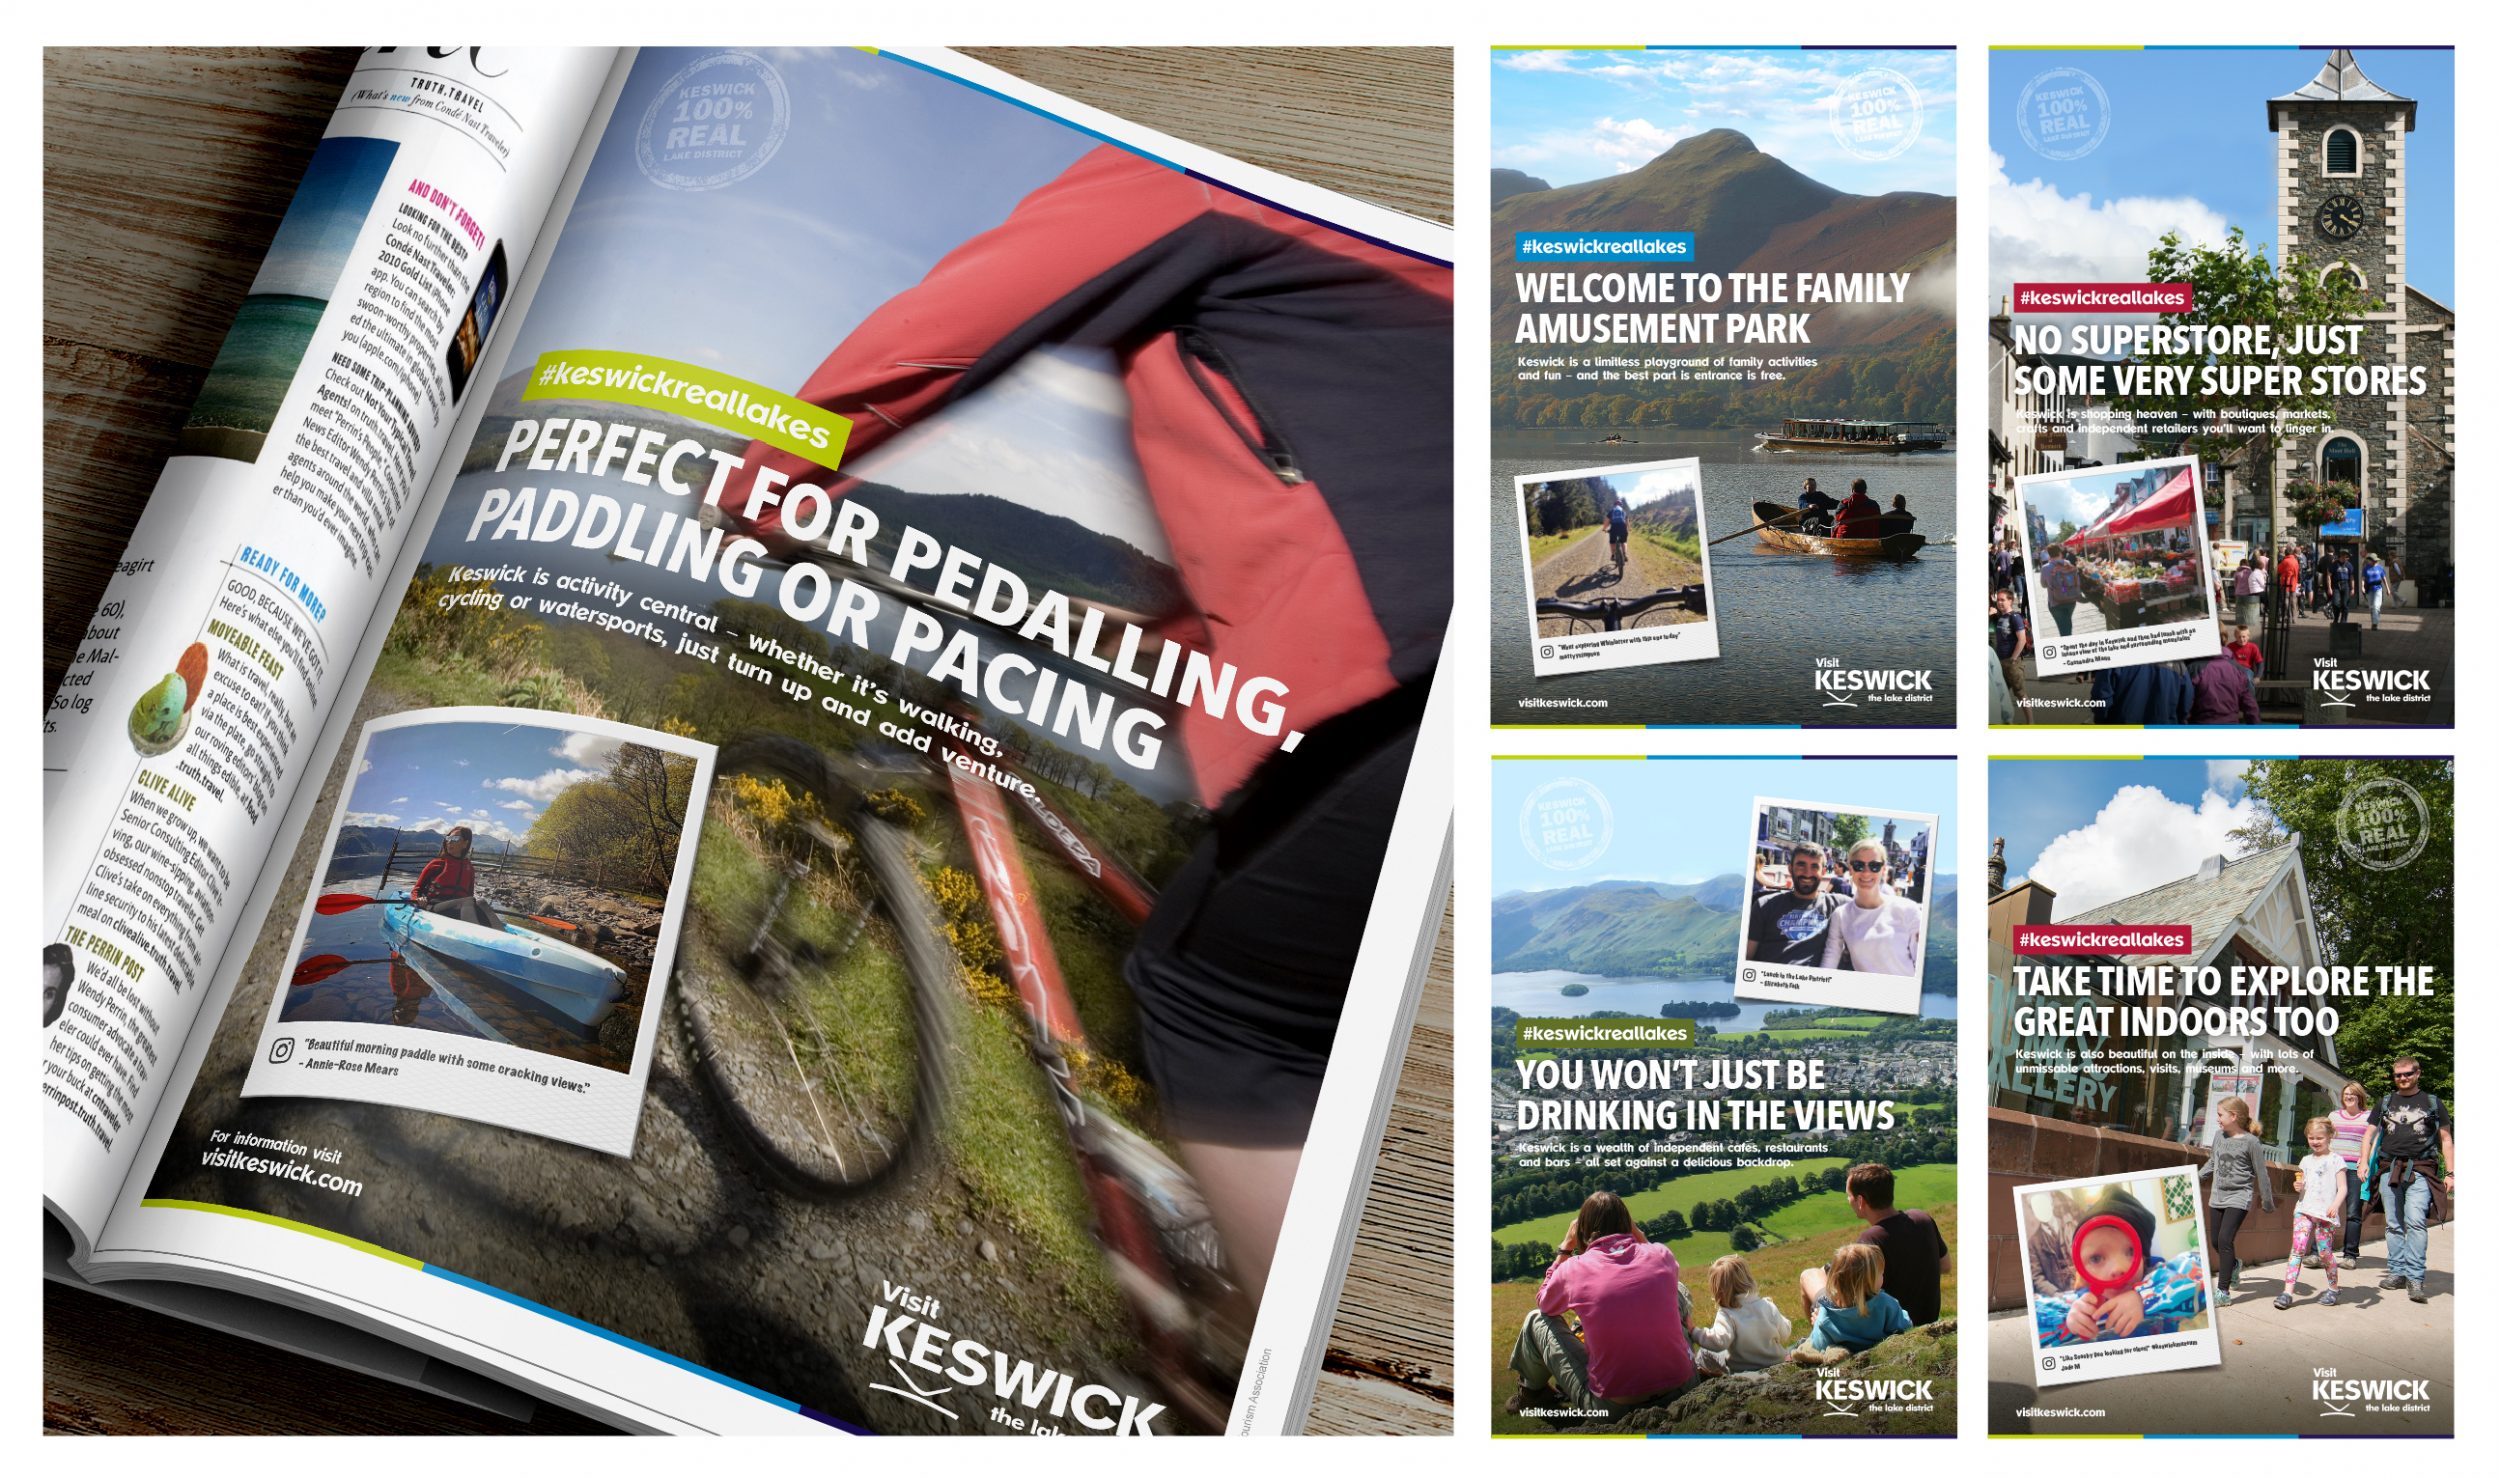 Keswick Tourism and Hotfoot Swap Vistas for Selfies to Promote the Real Keswick